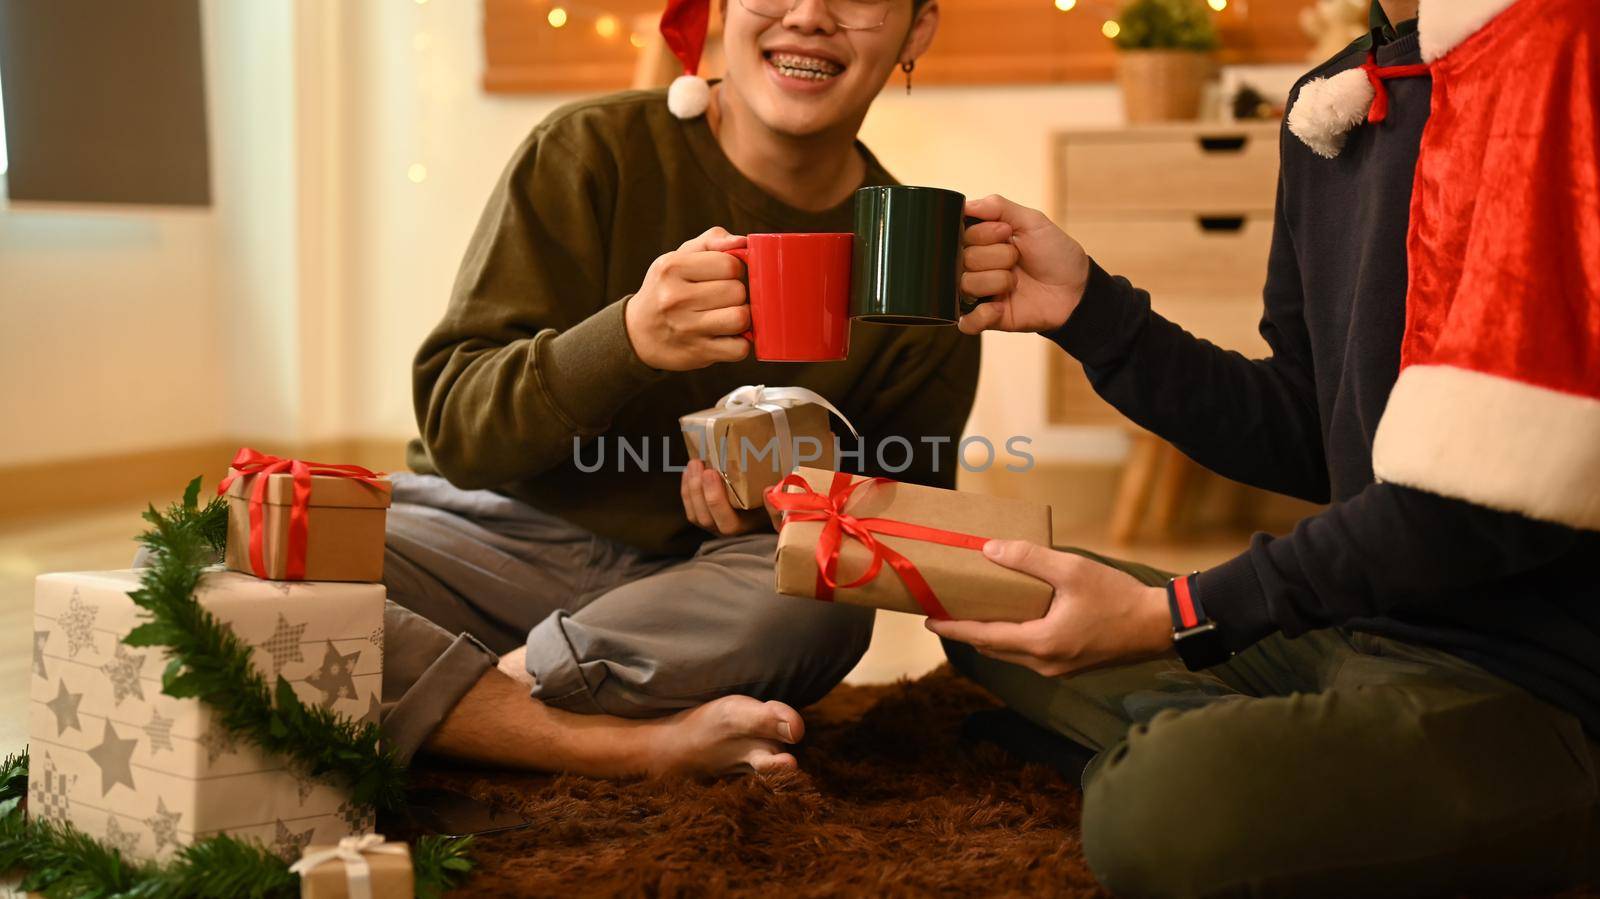 Two happy men clinking cups of hot chocolate while celebrating Christmas or New Year together in cozy living room.